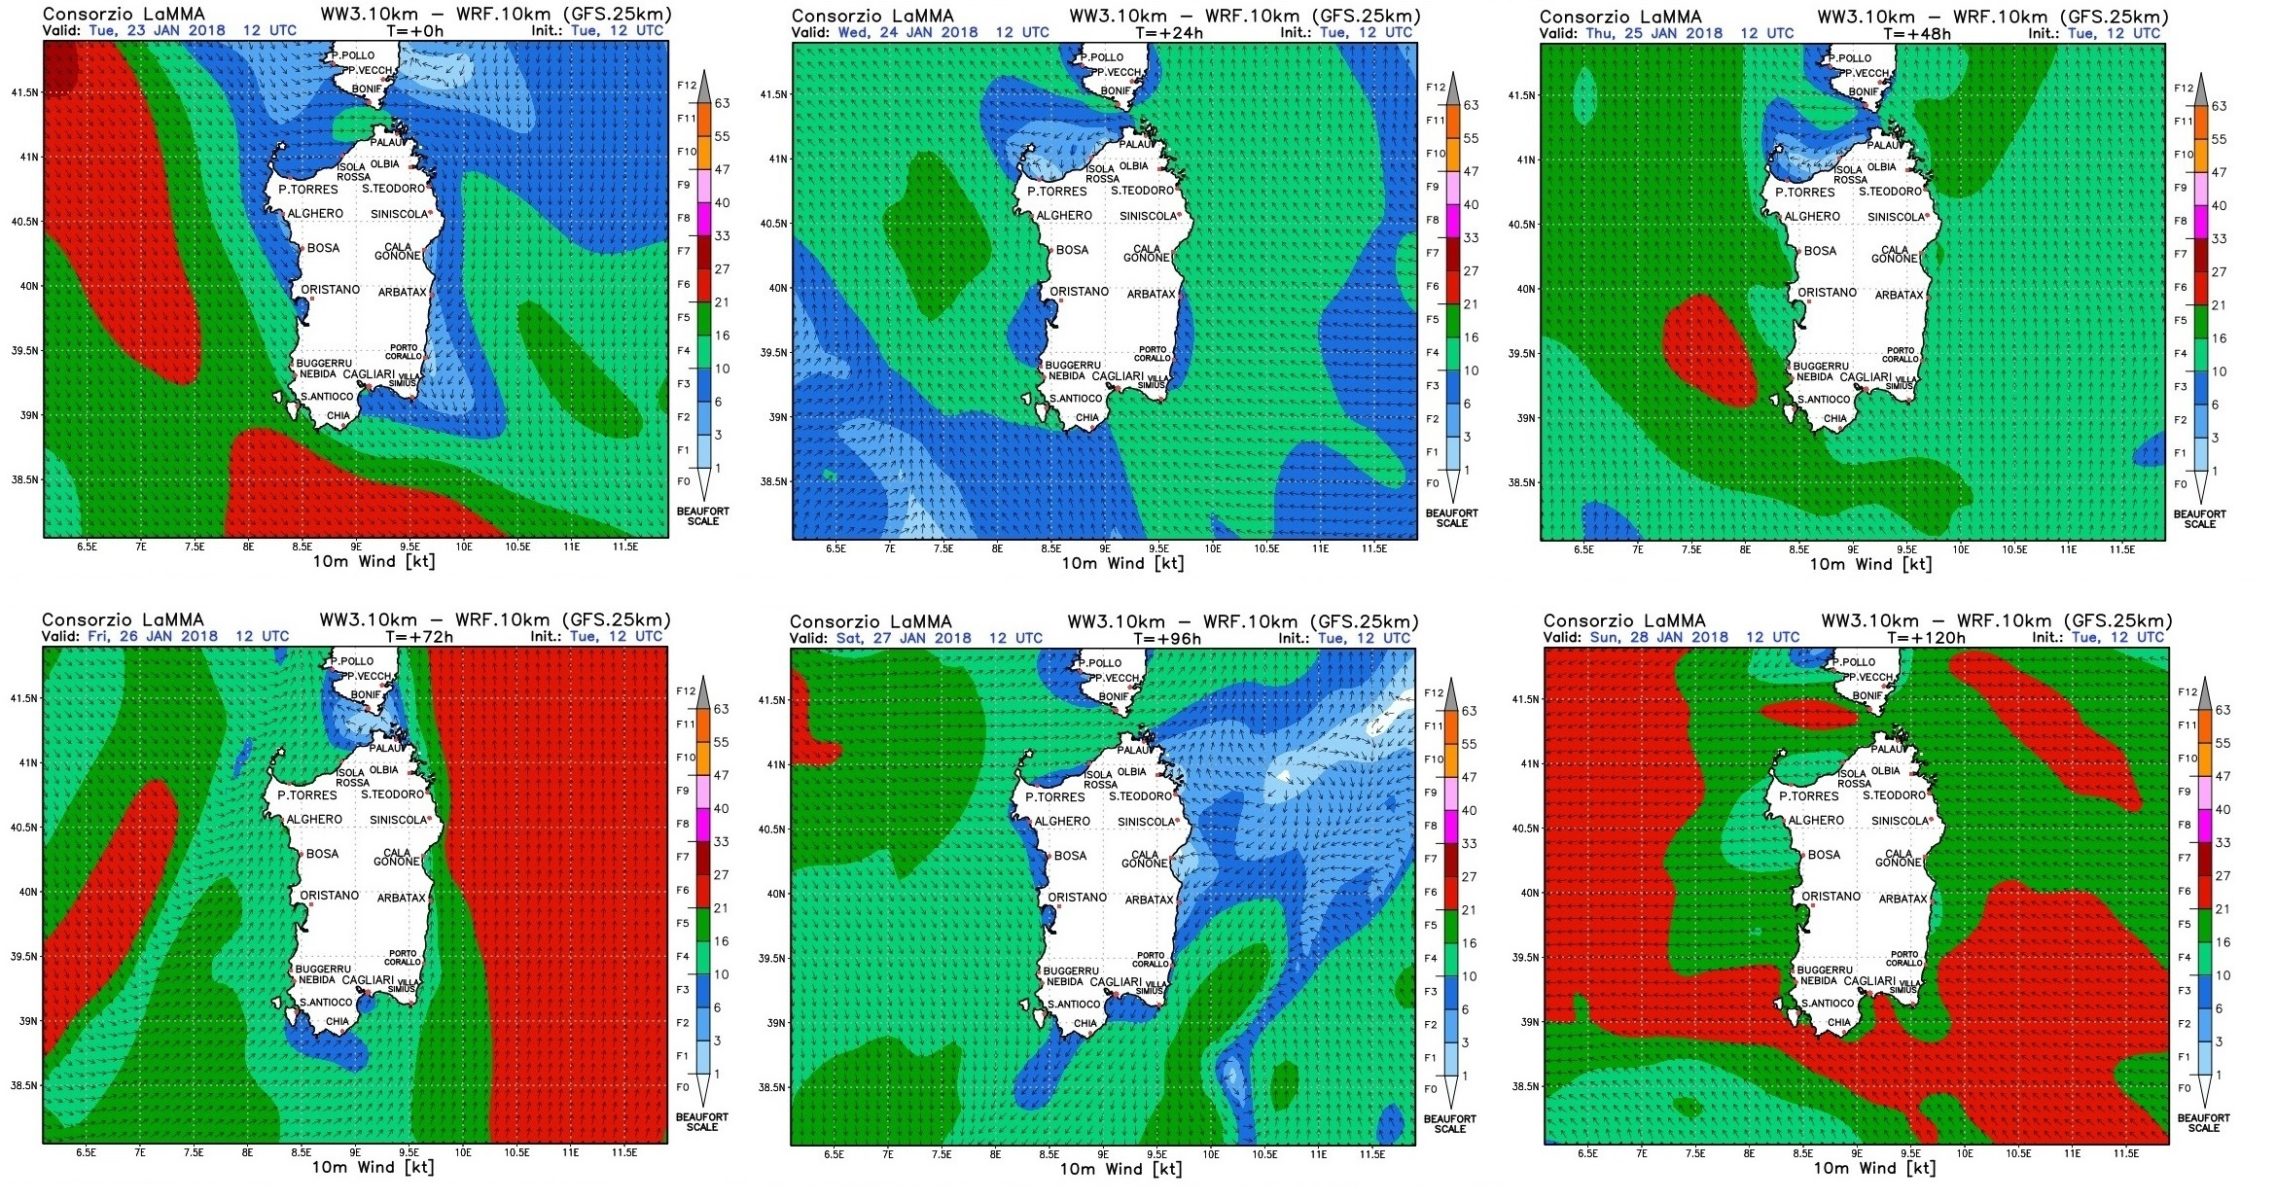 xample of Wind Forecast in Sardinia: the wind Change direction and Intensity every day